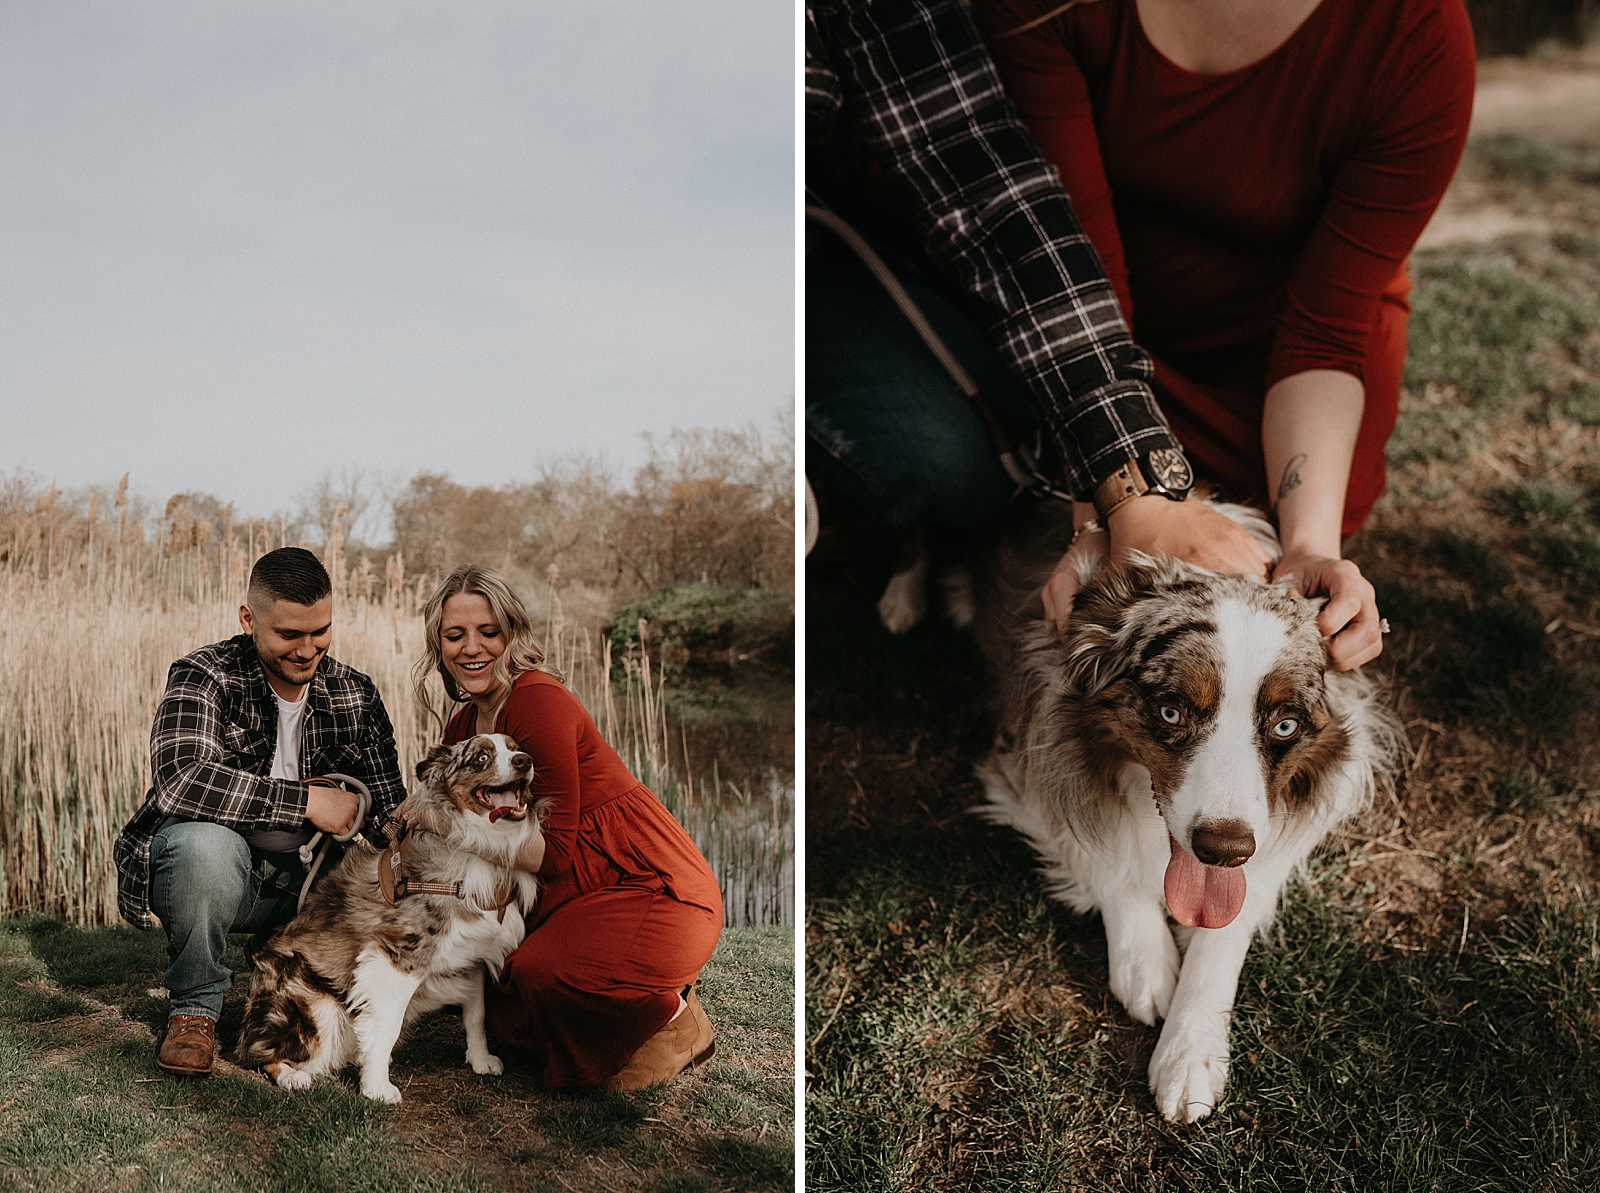 Couple leaning down and holding family dog